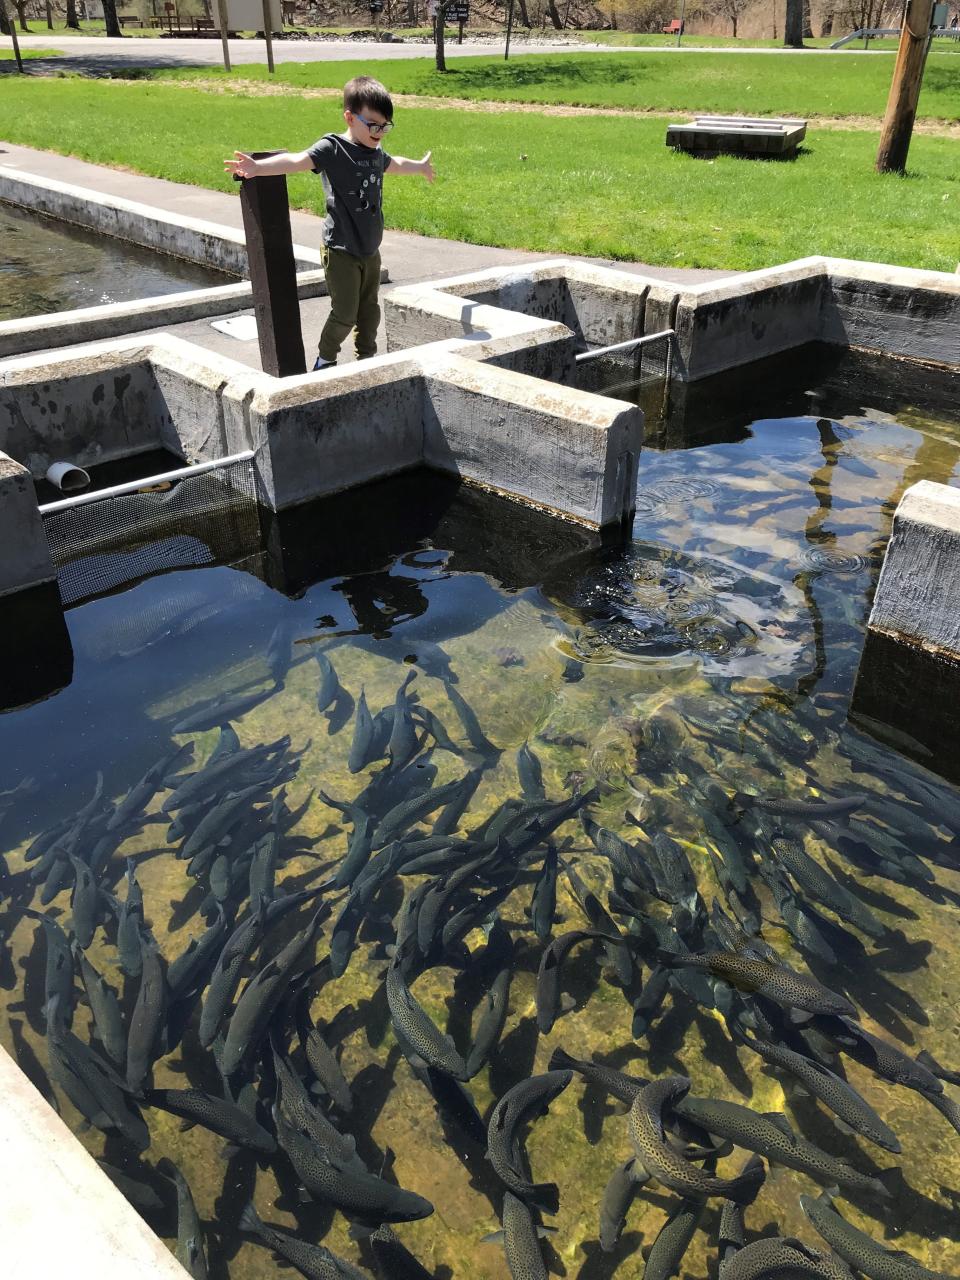 Reporter Victoria Freile's son Joe feeds trout at the Fish Hatchery at Powder Mills Park in Perinton.